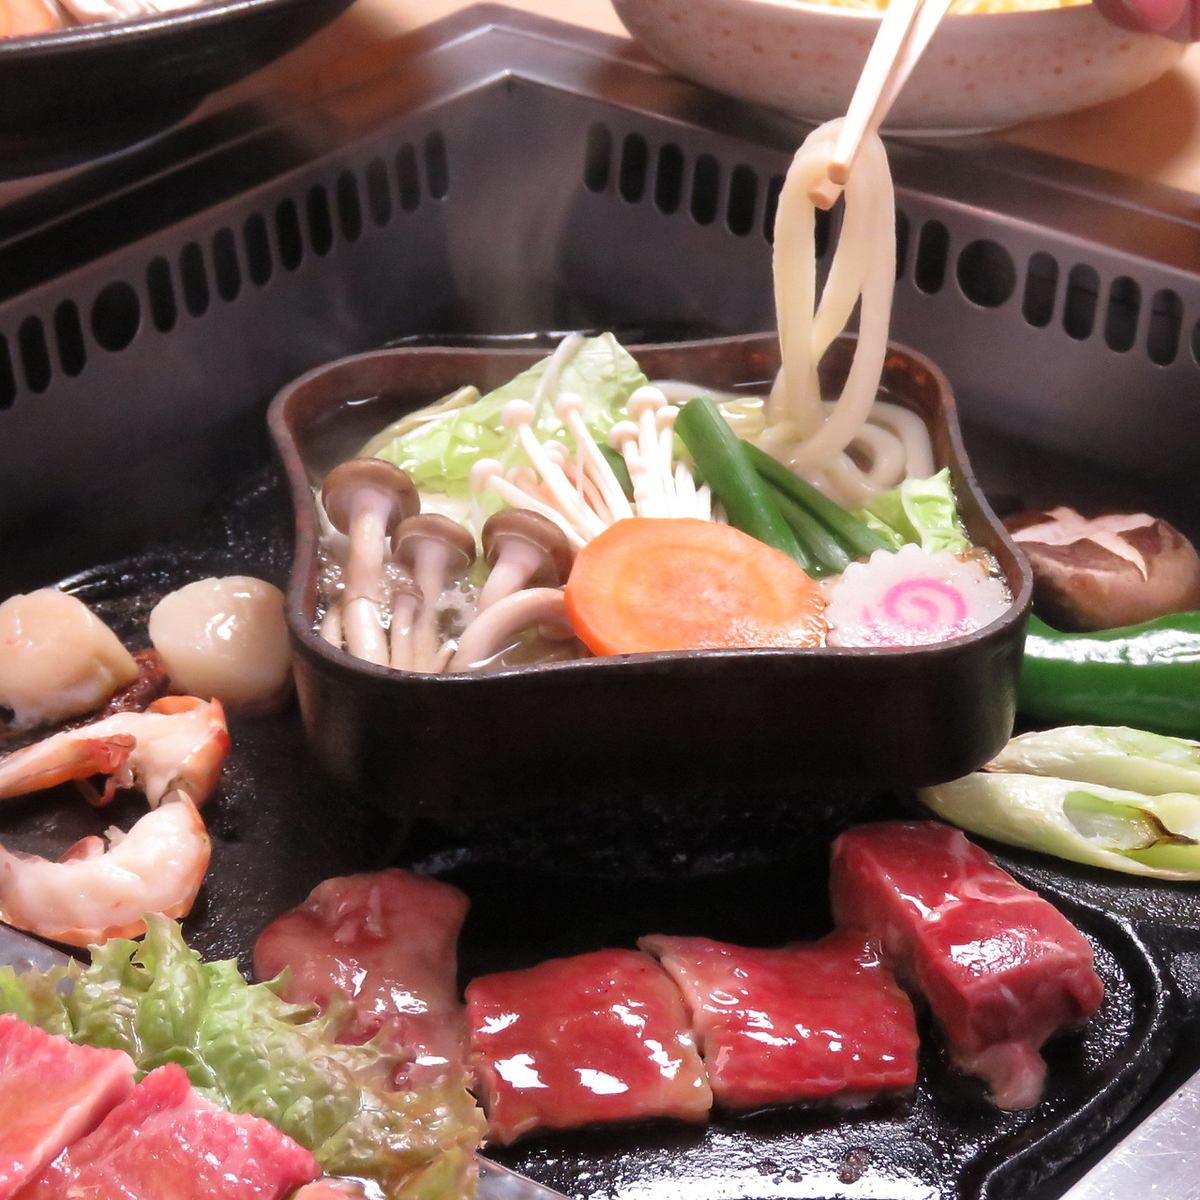 All-you-can-eat vegetables, udon noodles, and ramen by ordering meat specified by the restaurant!